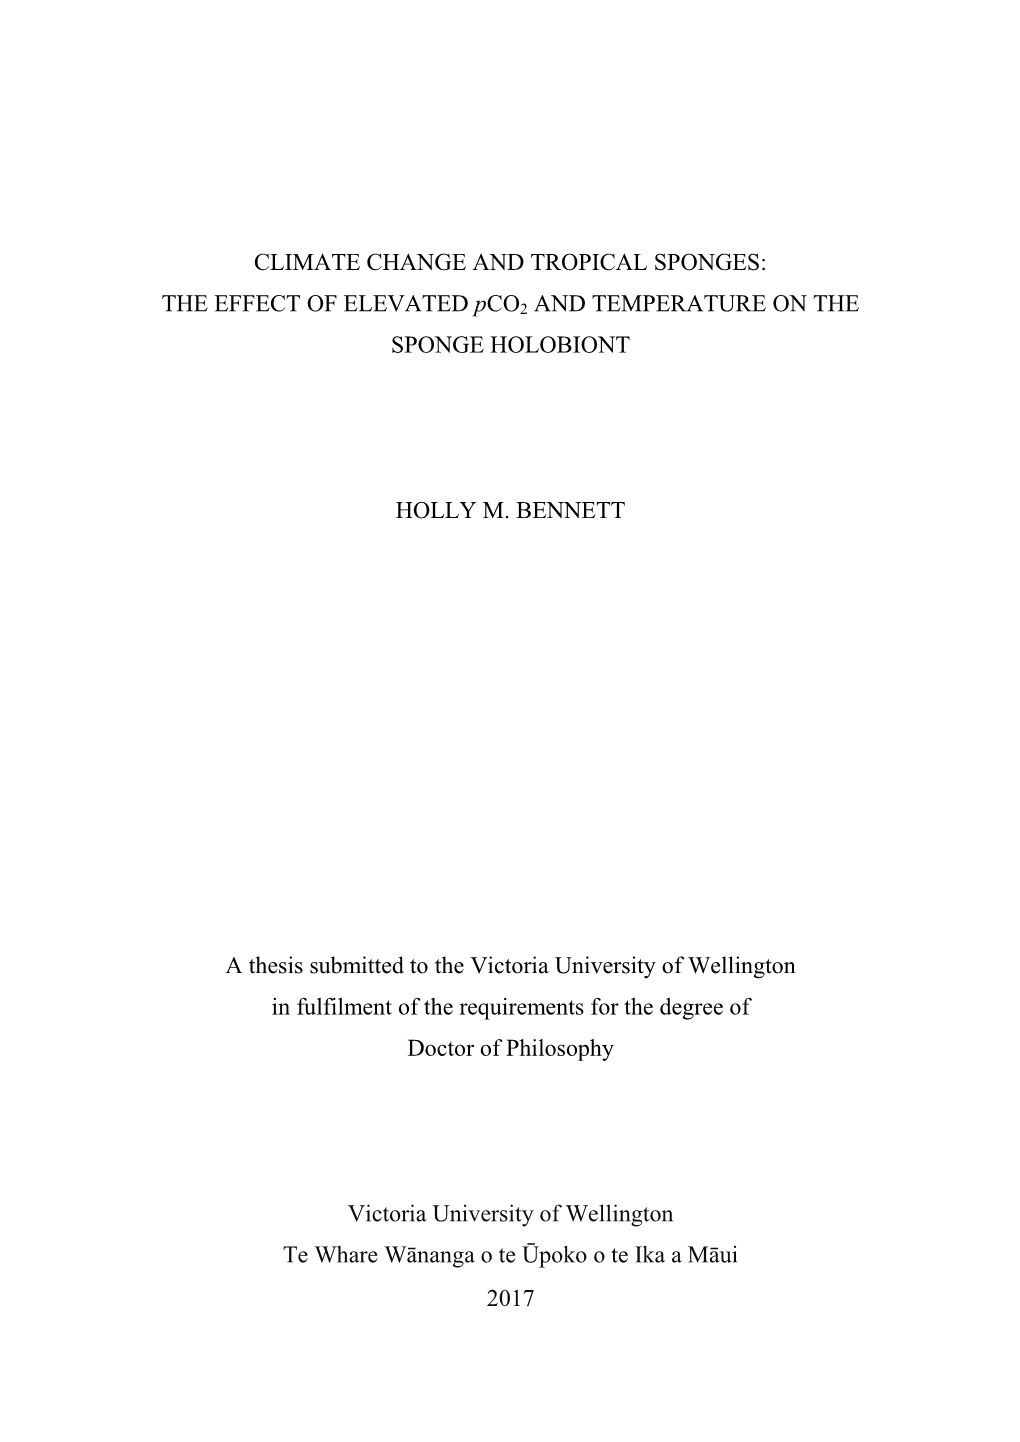 Climate Change and Tropical Sponges